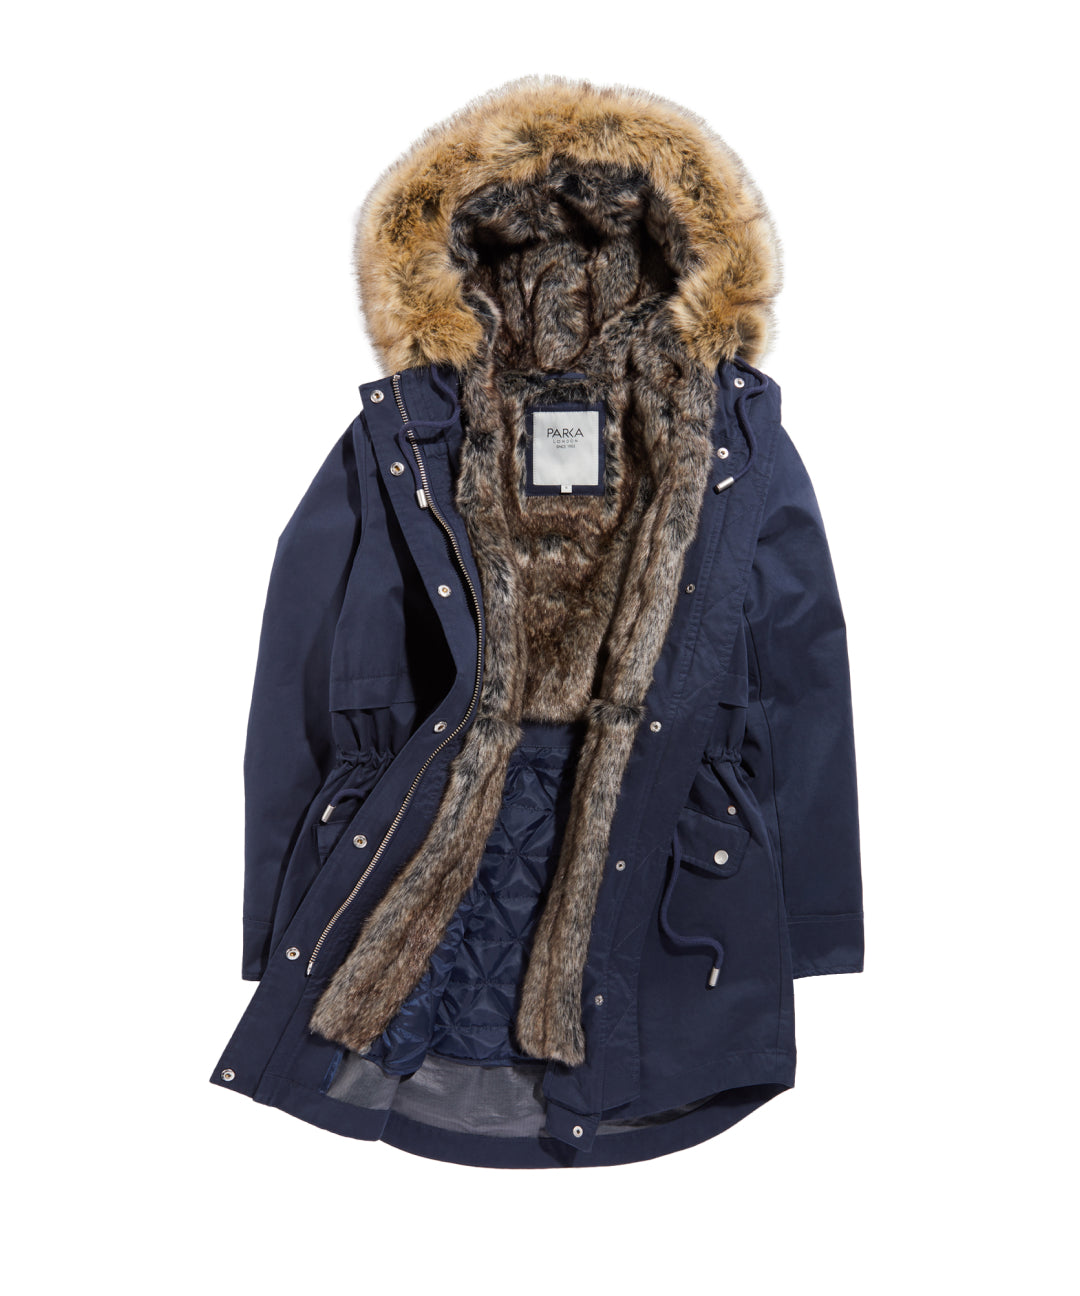 Men's, Women's & All-Gender Outer City Collection | Parka London